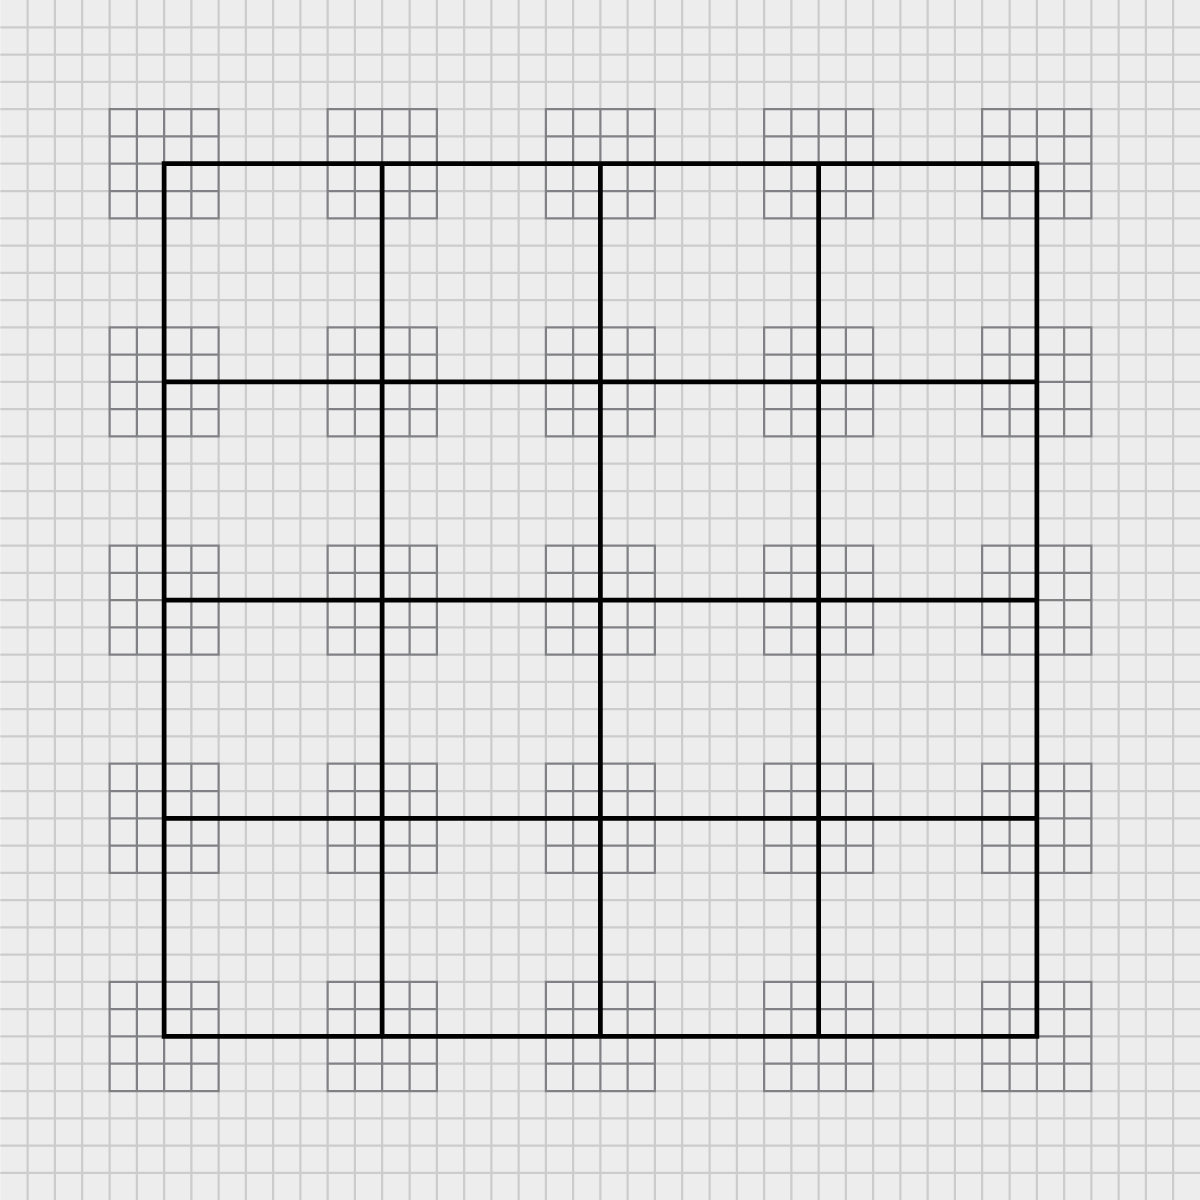 Smaller 4×4 grids are superimposed on the intersections of the main 4×4 grid